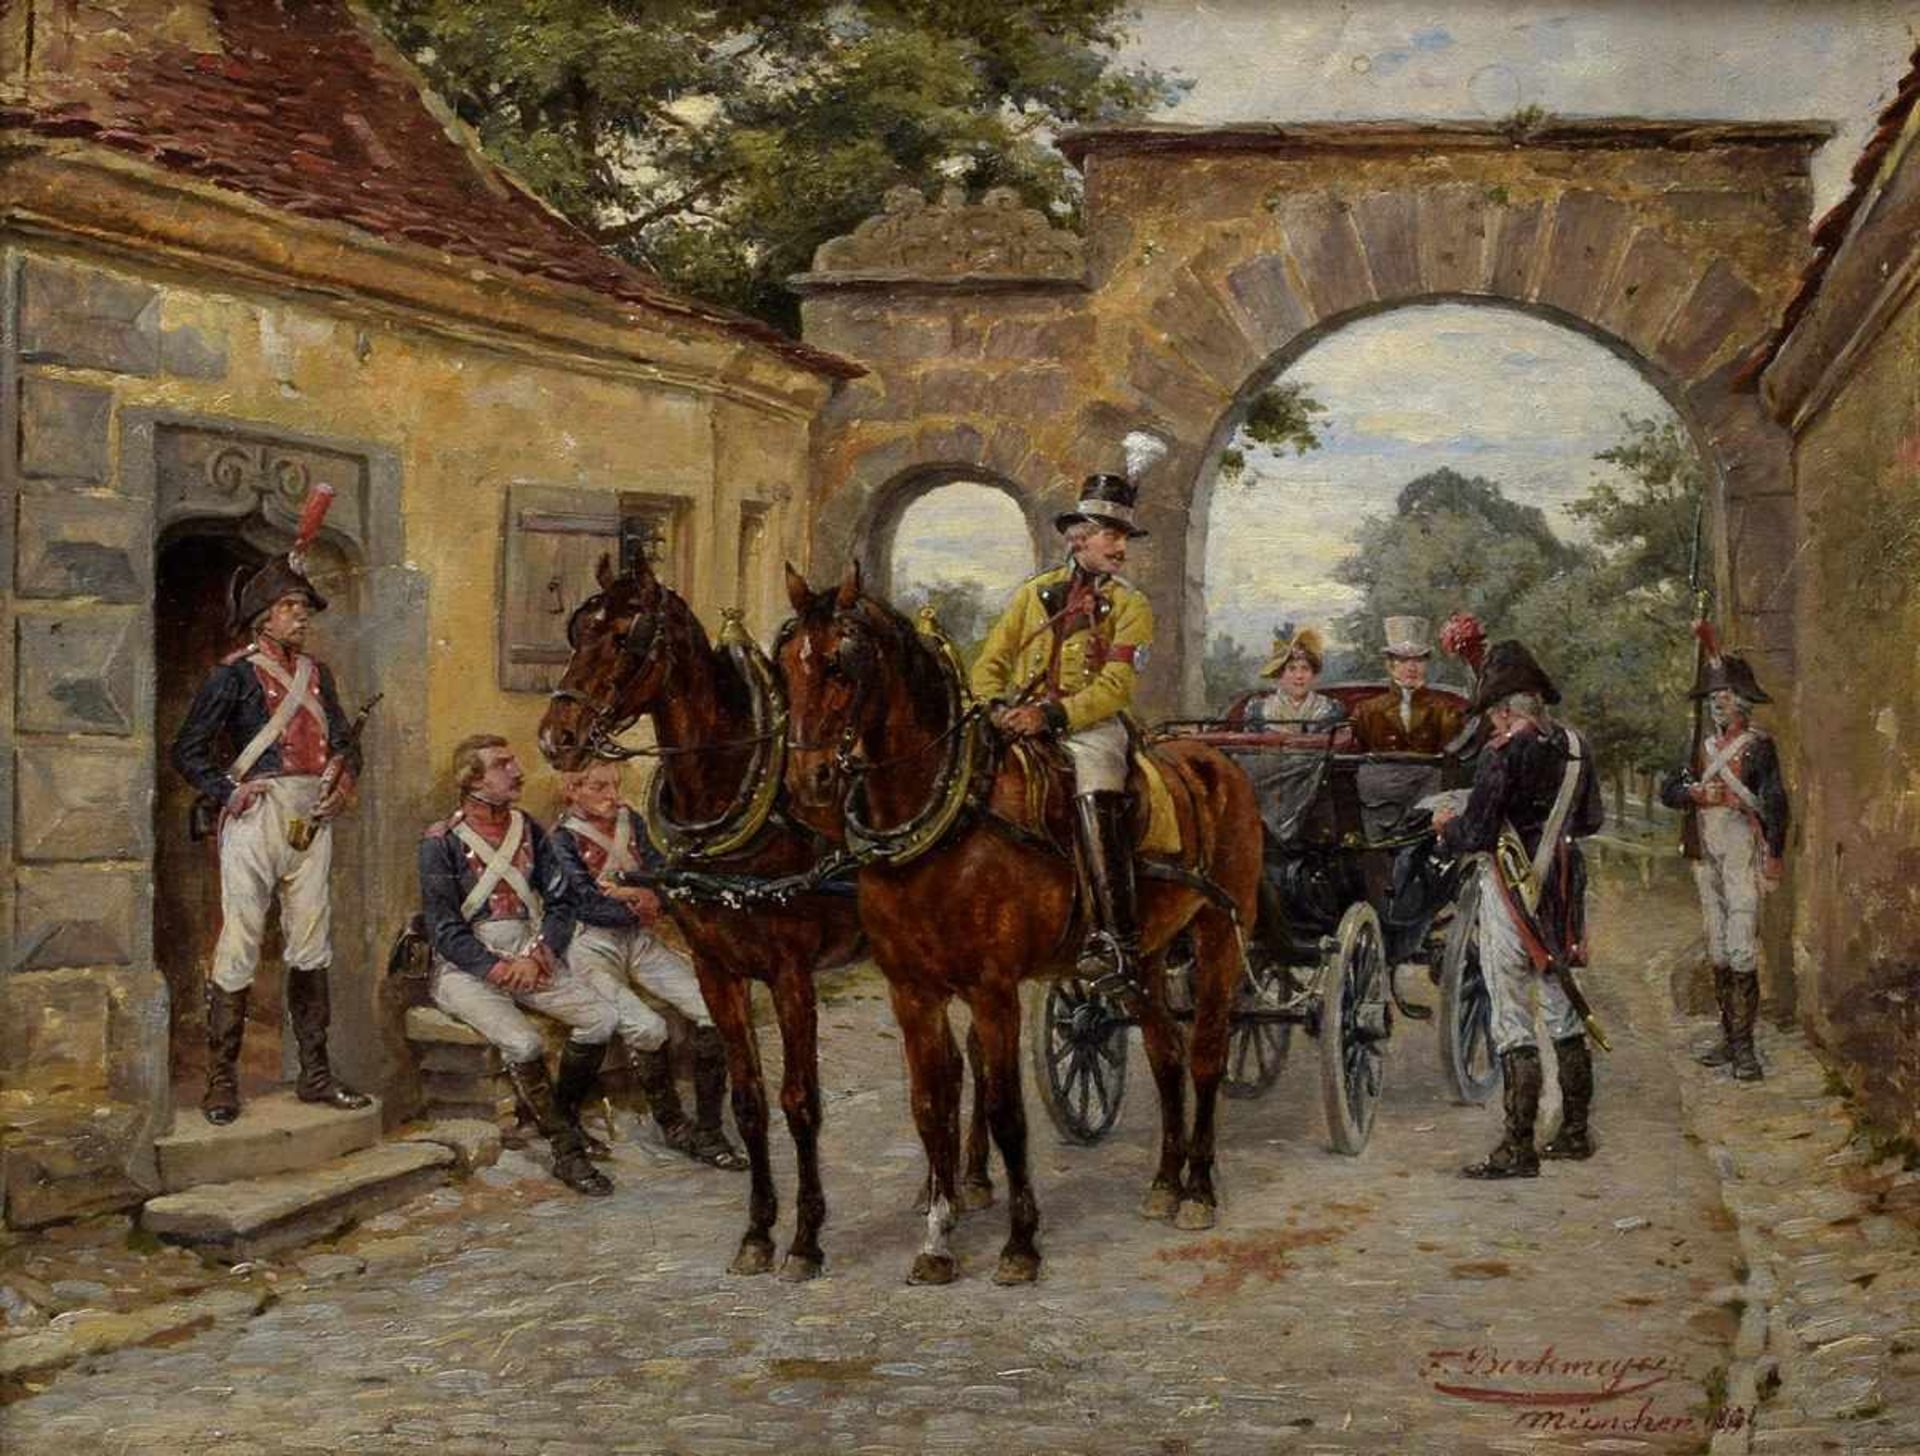 Birkmeyer, Fritz (1848-1897) "Border control" 1891, oil/wood, signed and dated lower right, 20,